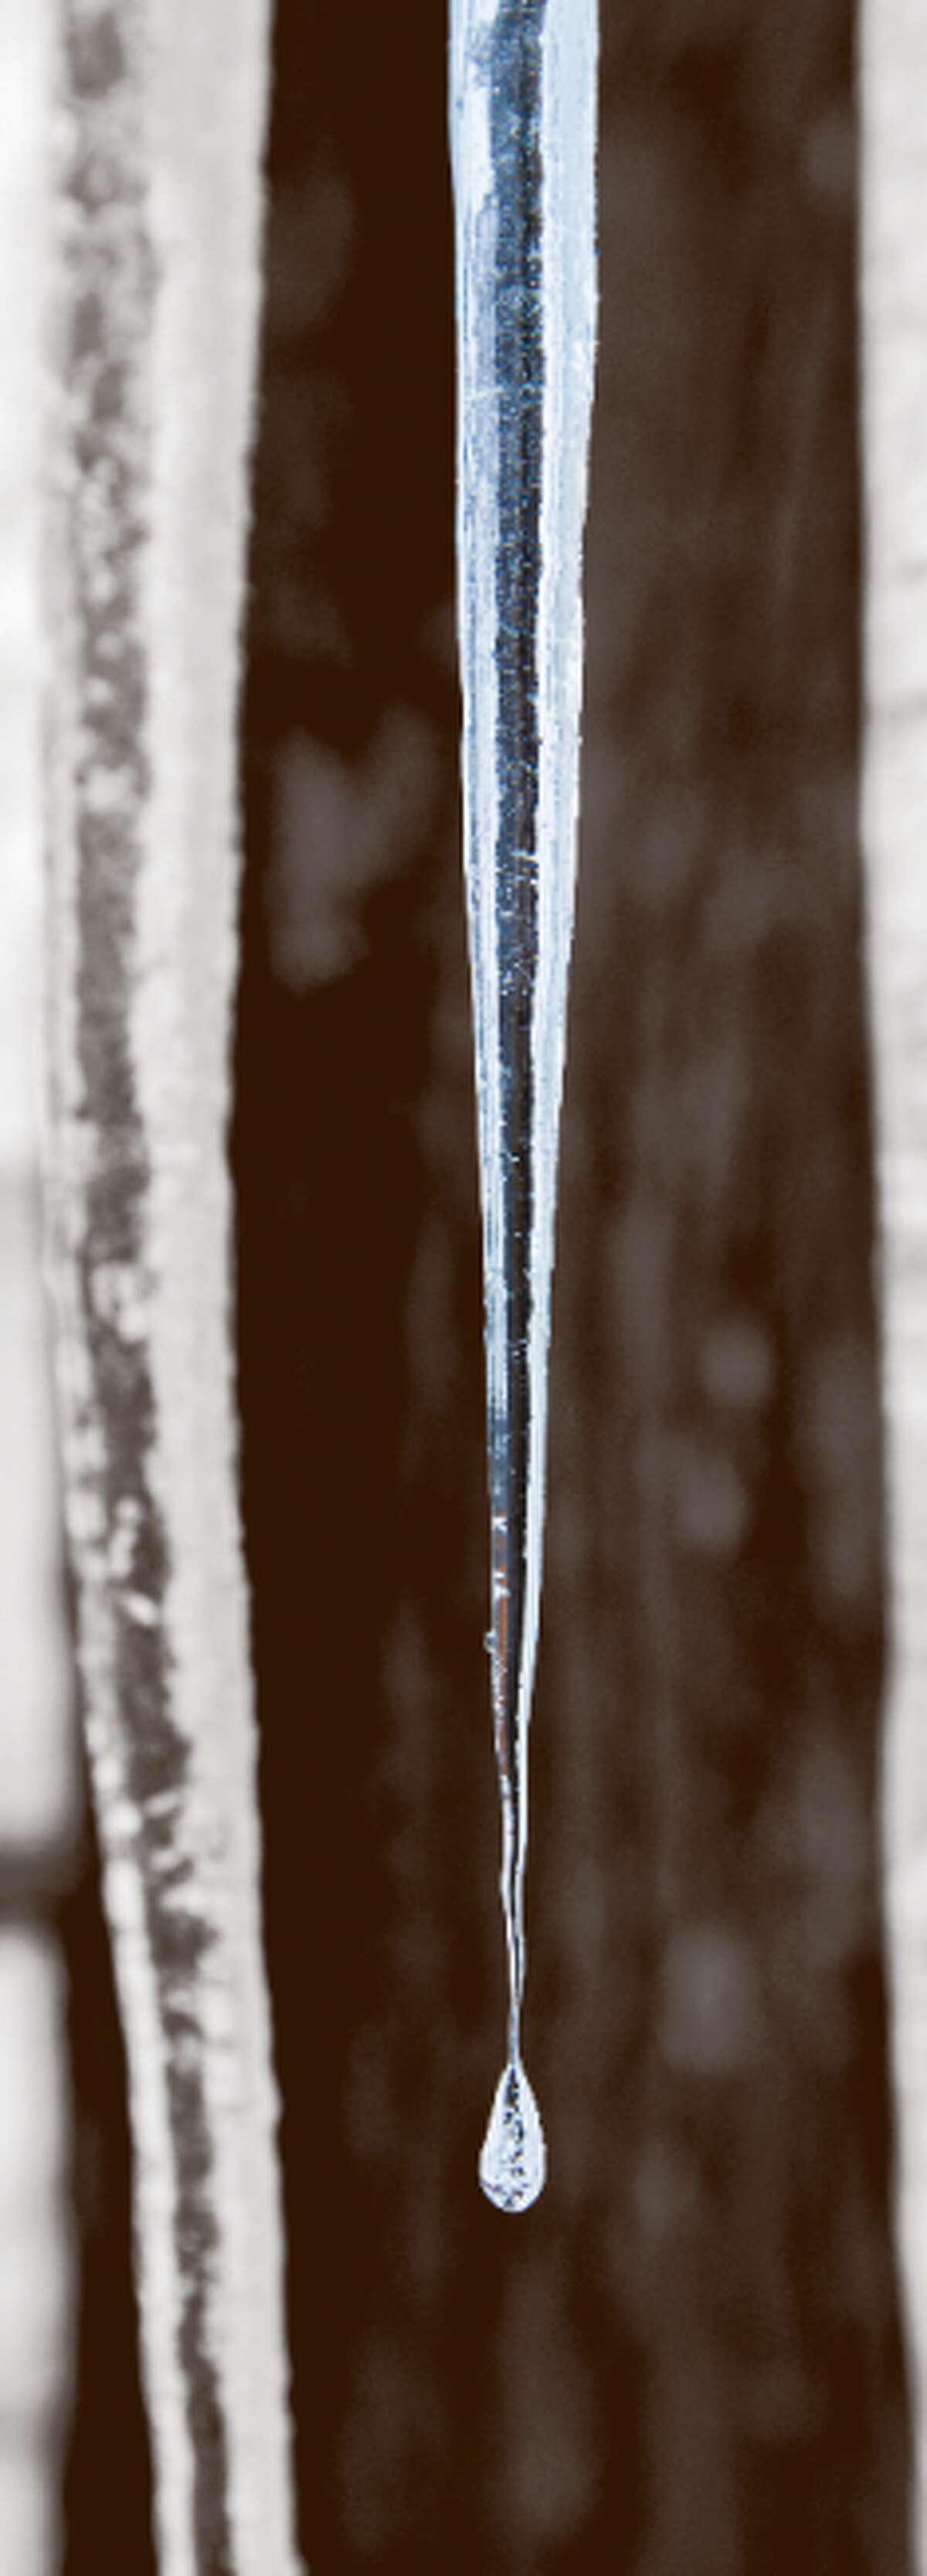 FROZEN DROPLET: This icicle is hanging off my house. Feel free to take your camera out and practice on just about anything. You’ll learn more about your camera and you may even surprise yourself with a brilliant shot.